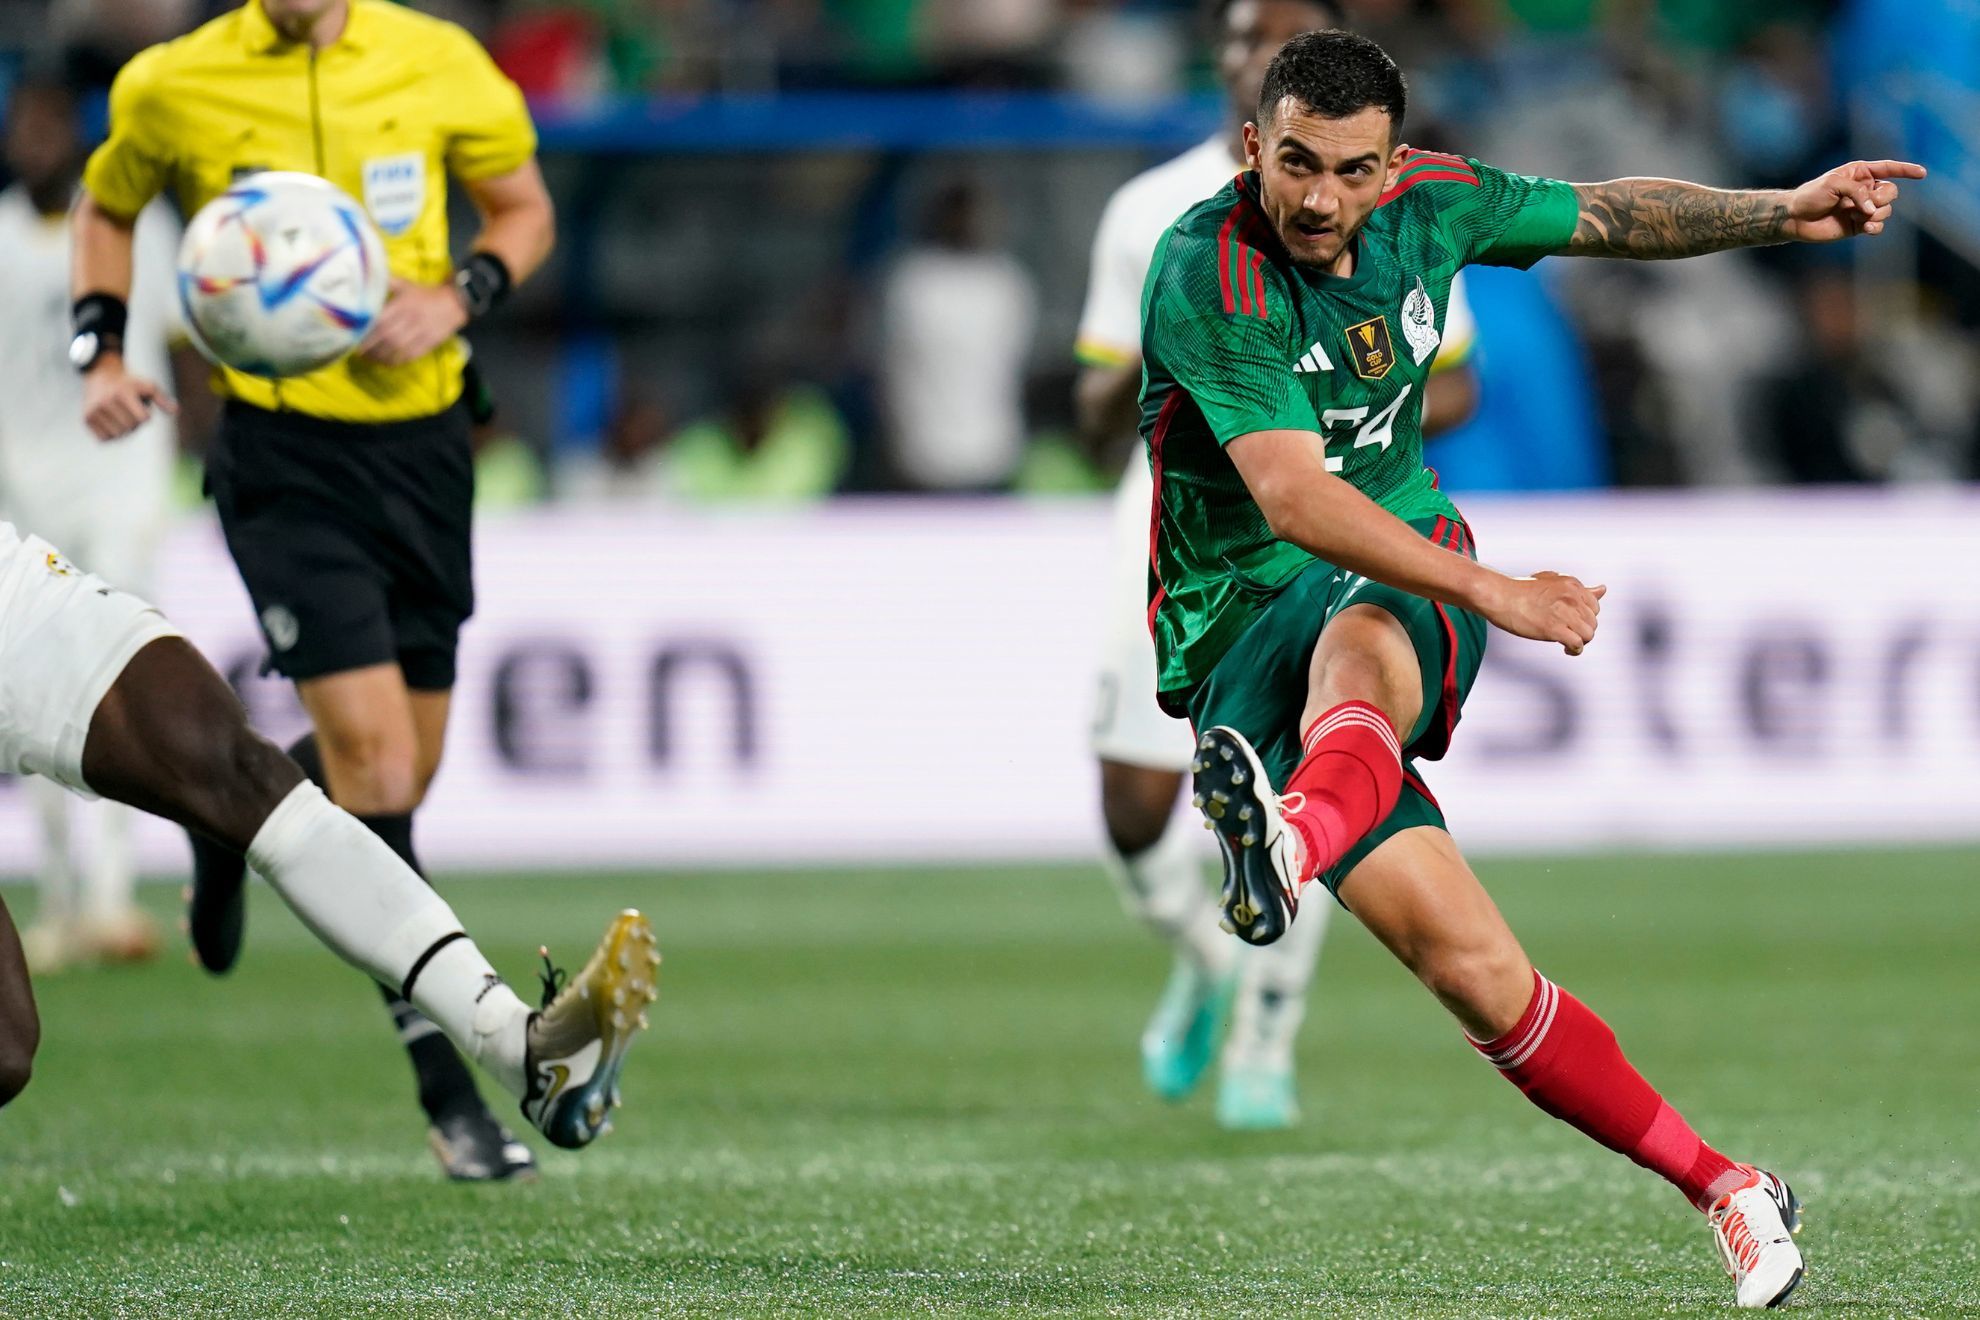 Mexico finally convinces its fans with solid win over Ghana in friendly